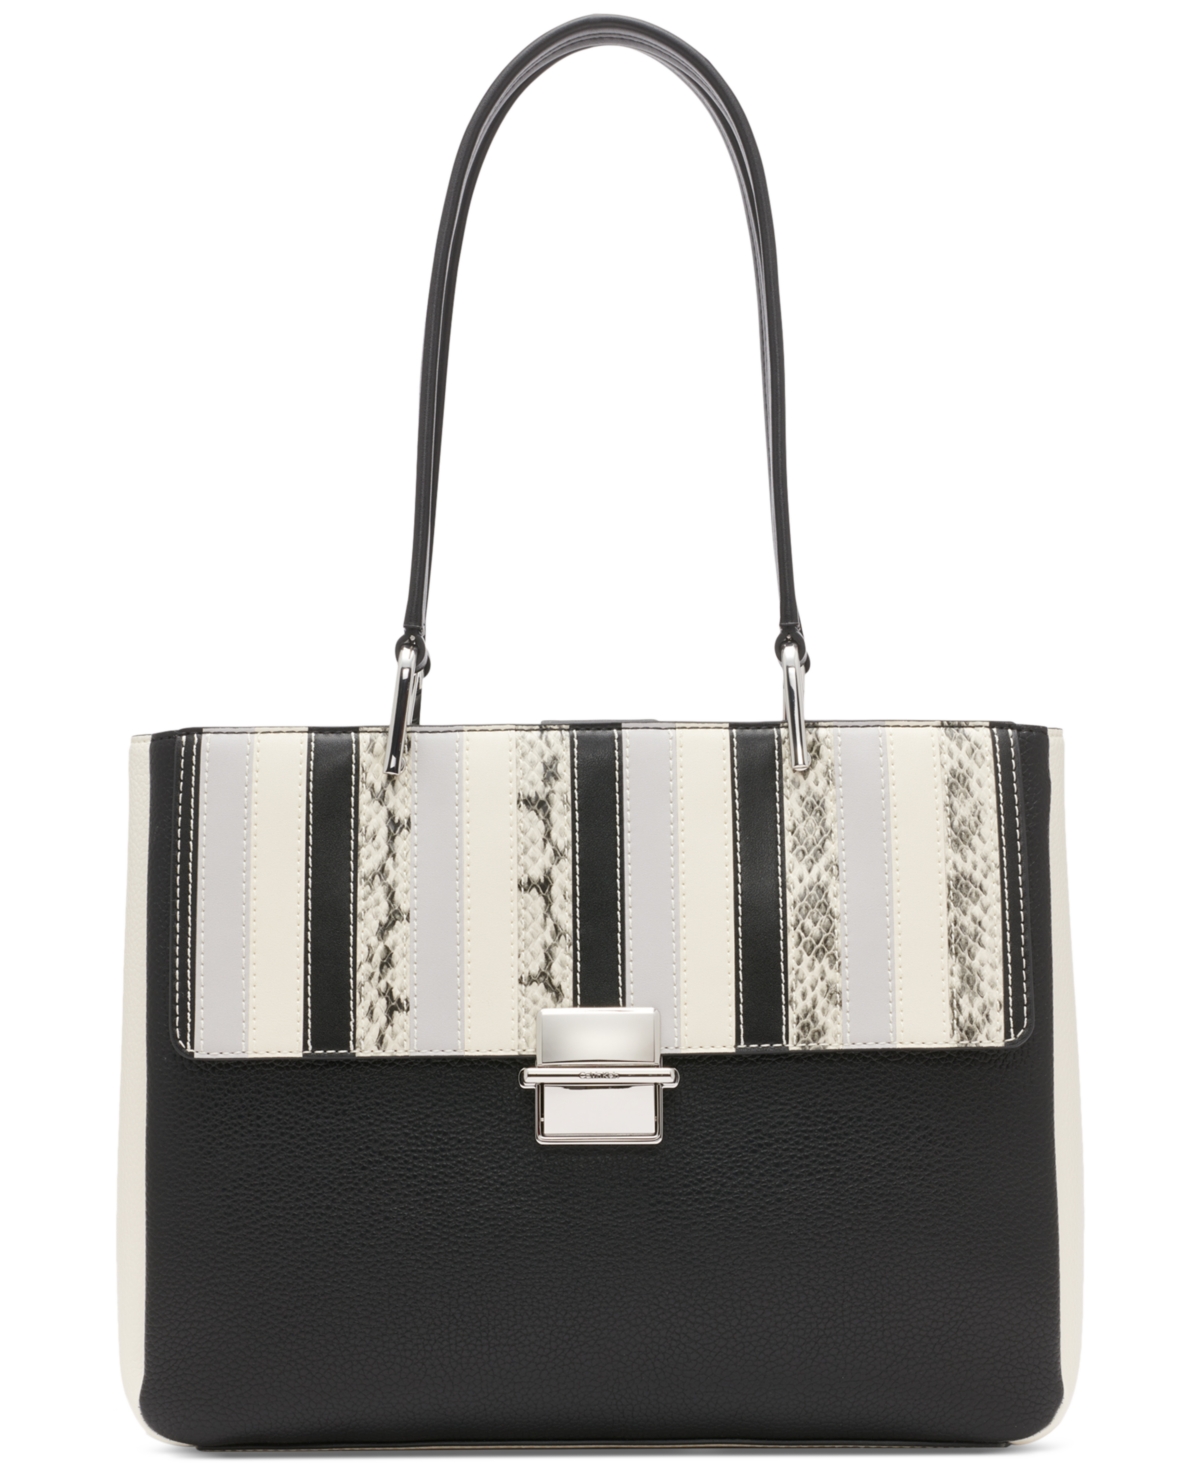 Clove Mixed Material Push-Lock Triple Compartment Tote Bag - Black/White Snake